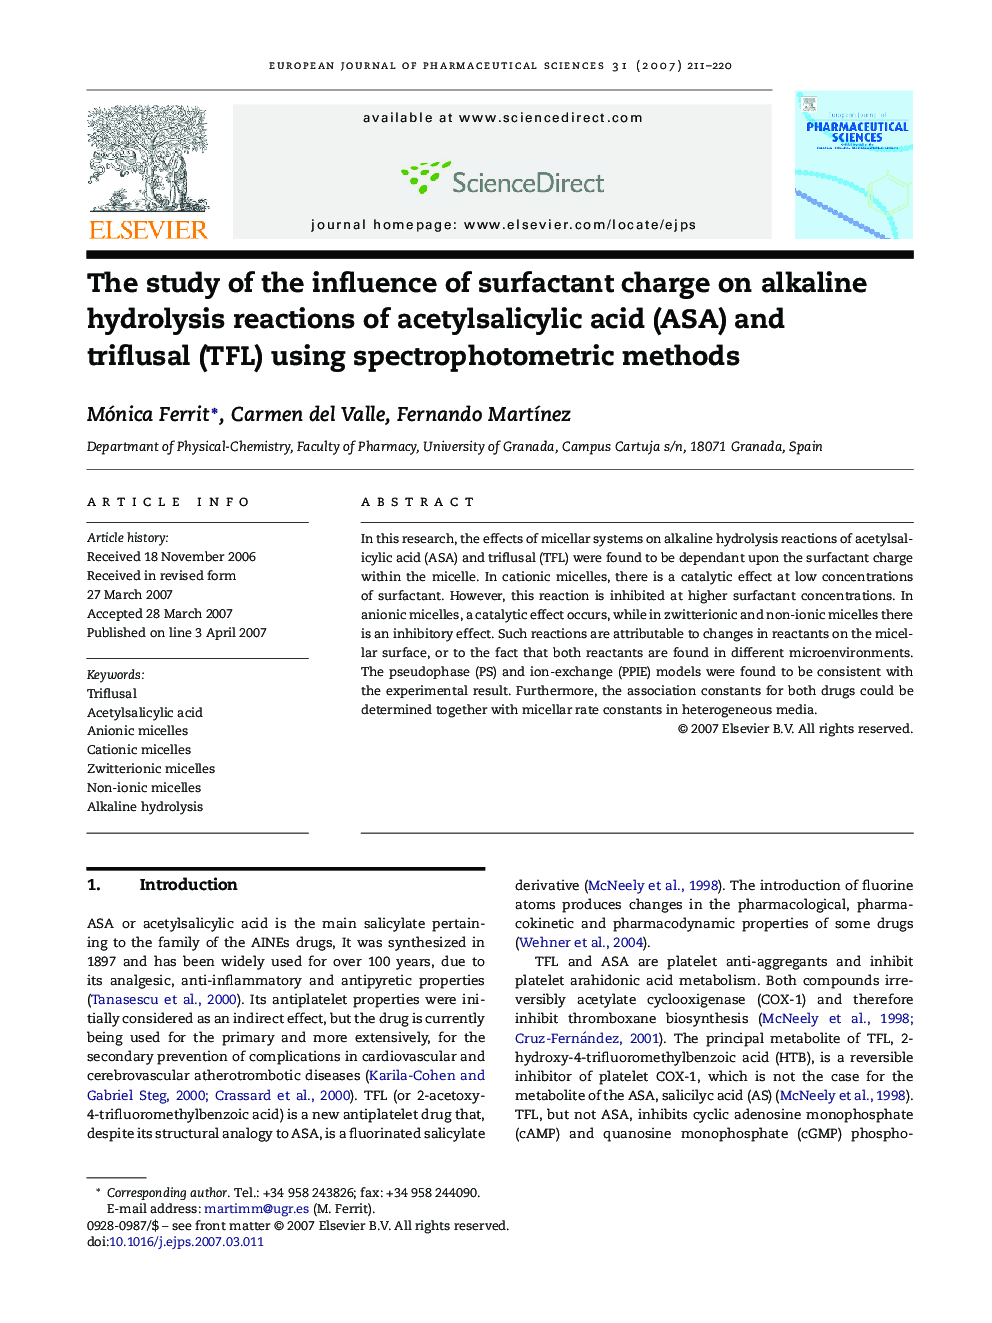 The study of the influence of surfactant charge on alkaline hydrolysis reactions of acetylsalicylic acid (ASA) and triflusal (TFL) using spectrophotometric methods